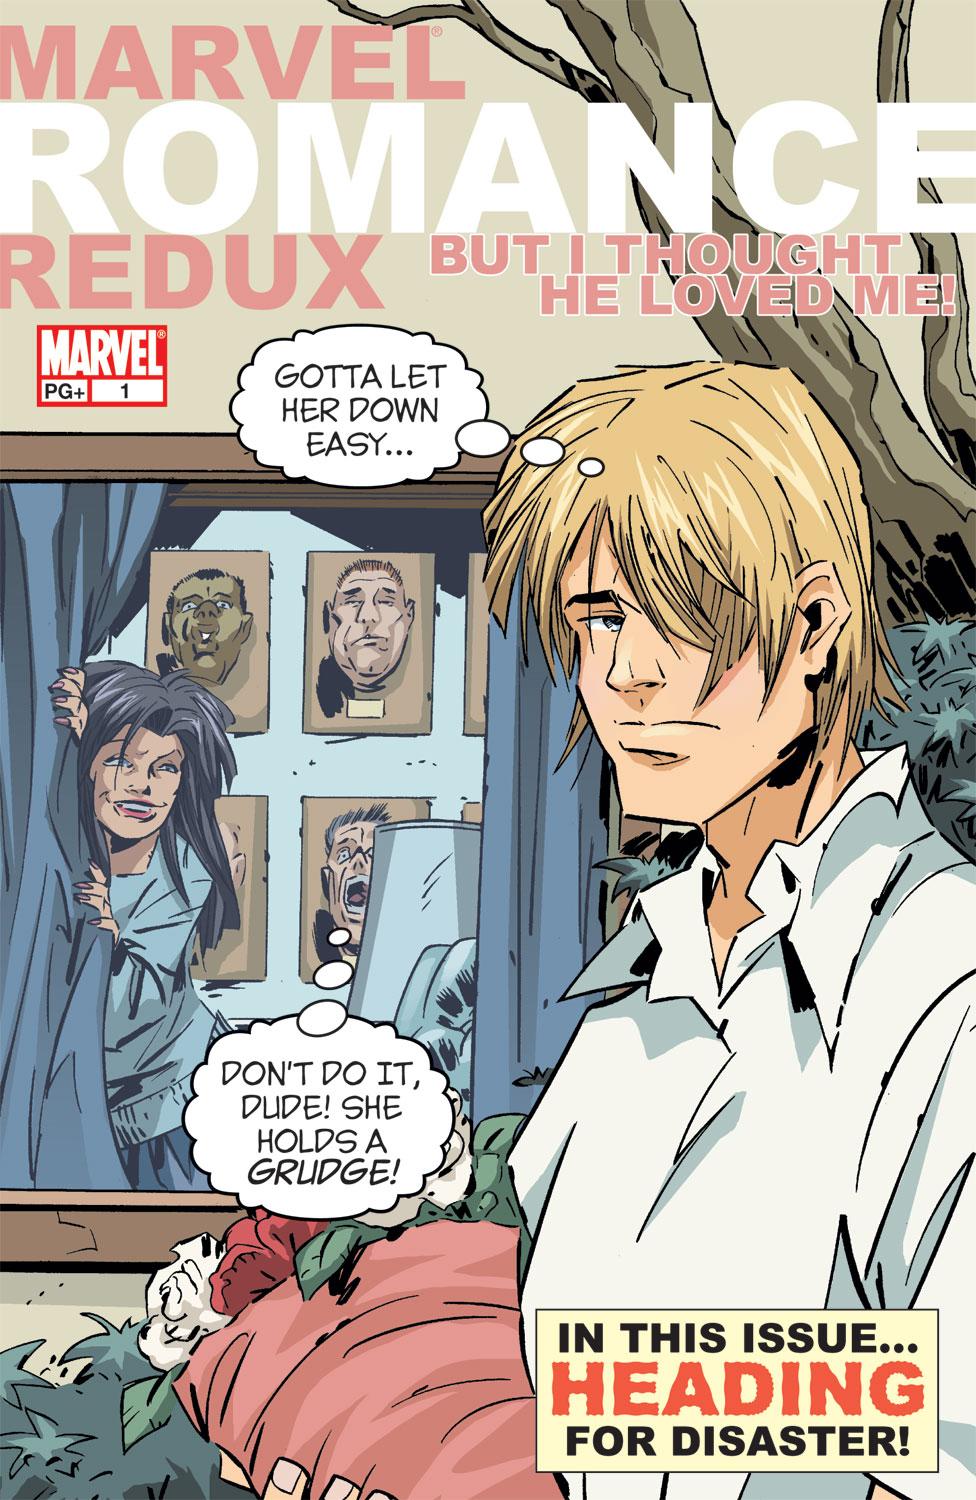 Marvel Romance Redux: But I Thought He Loved Me (2006) #1